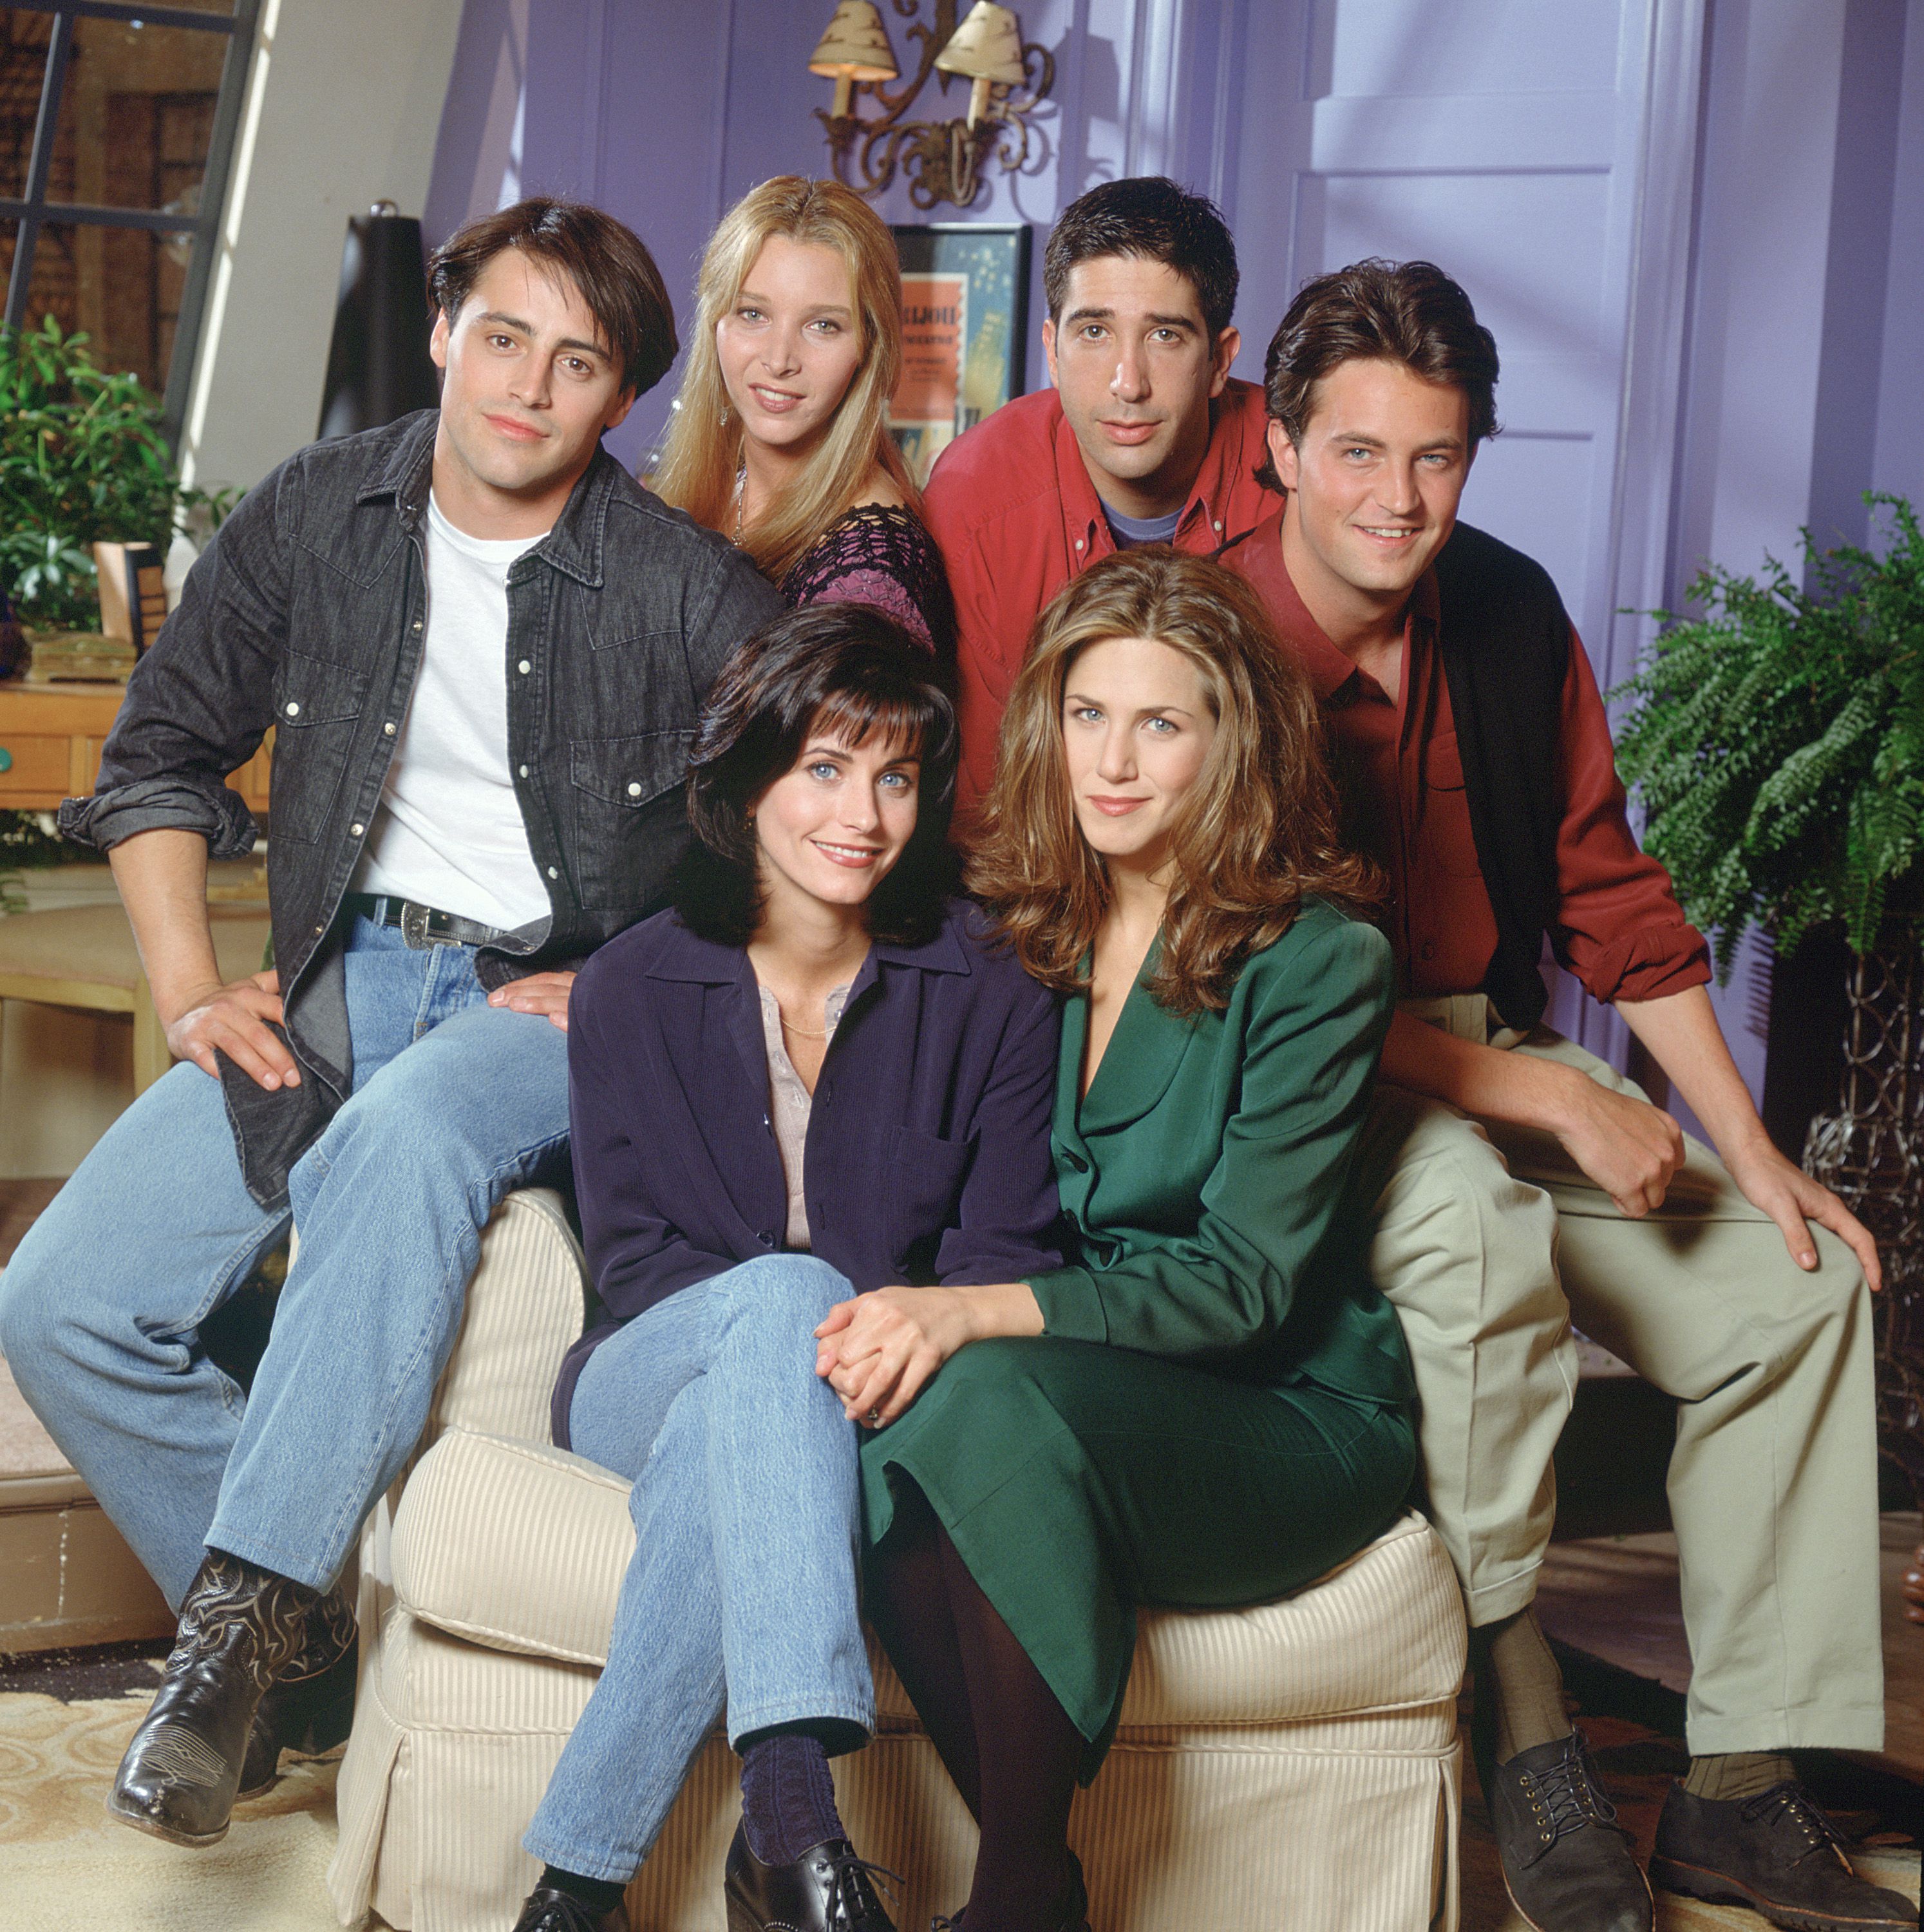 50 Friends Facts Every Superfan Should Know - Friends TV Show Trivia